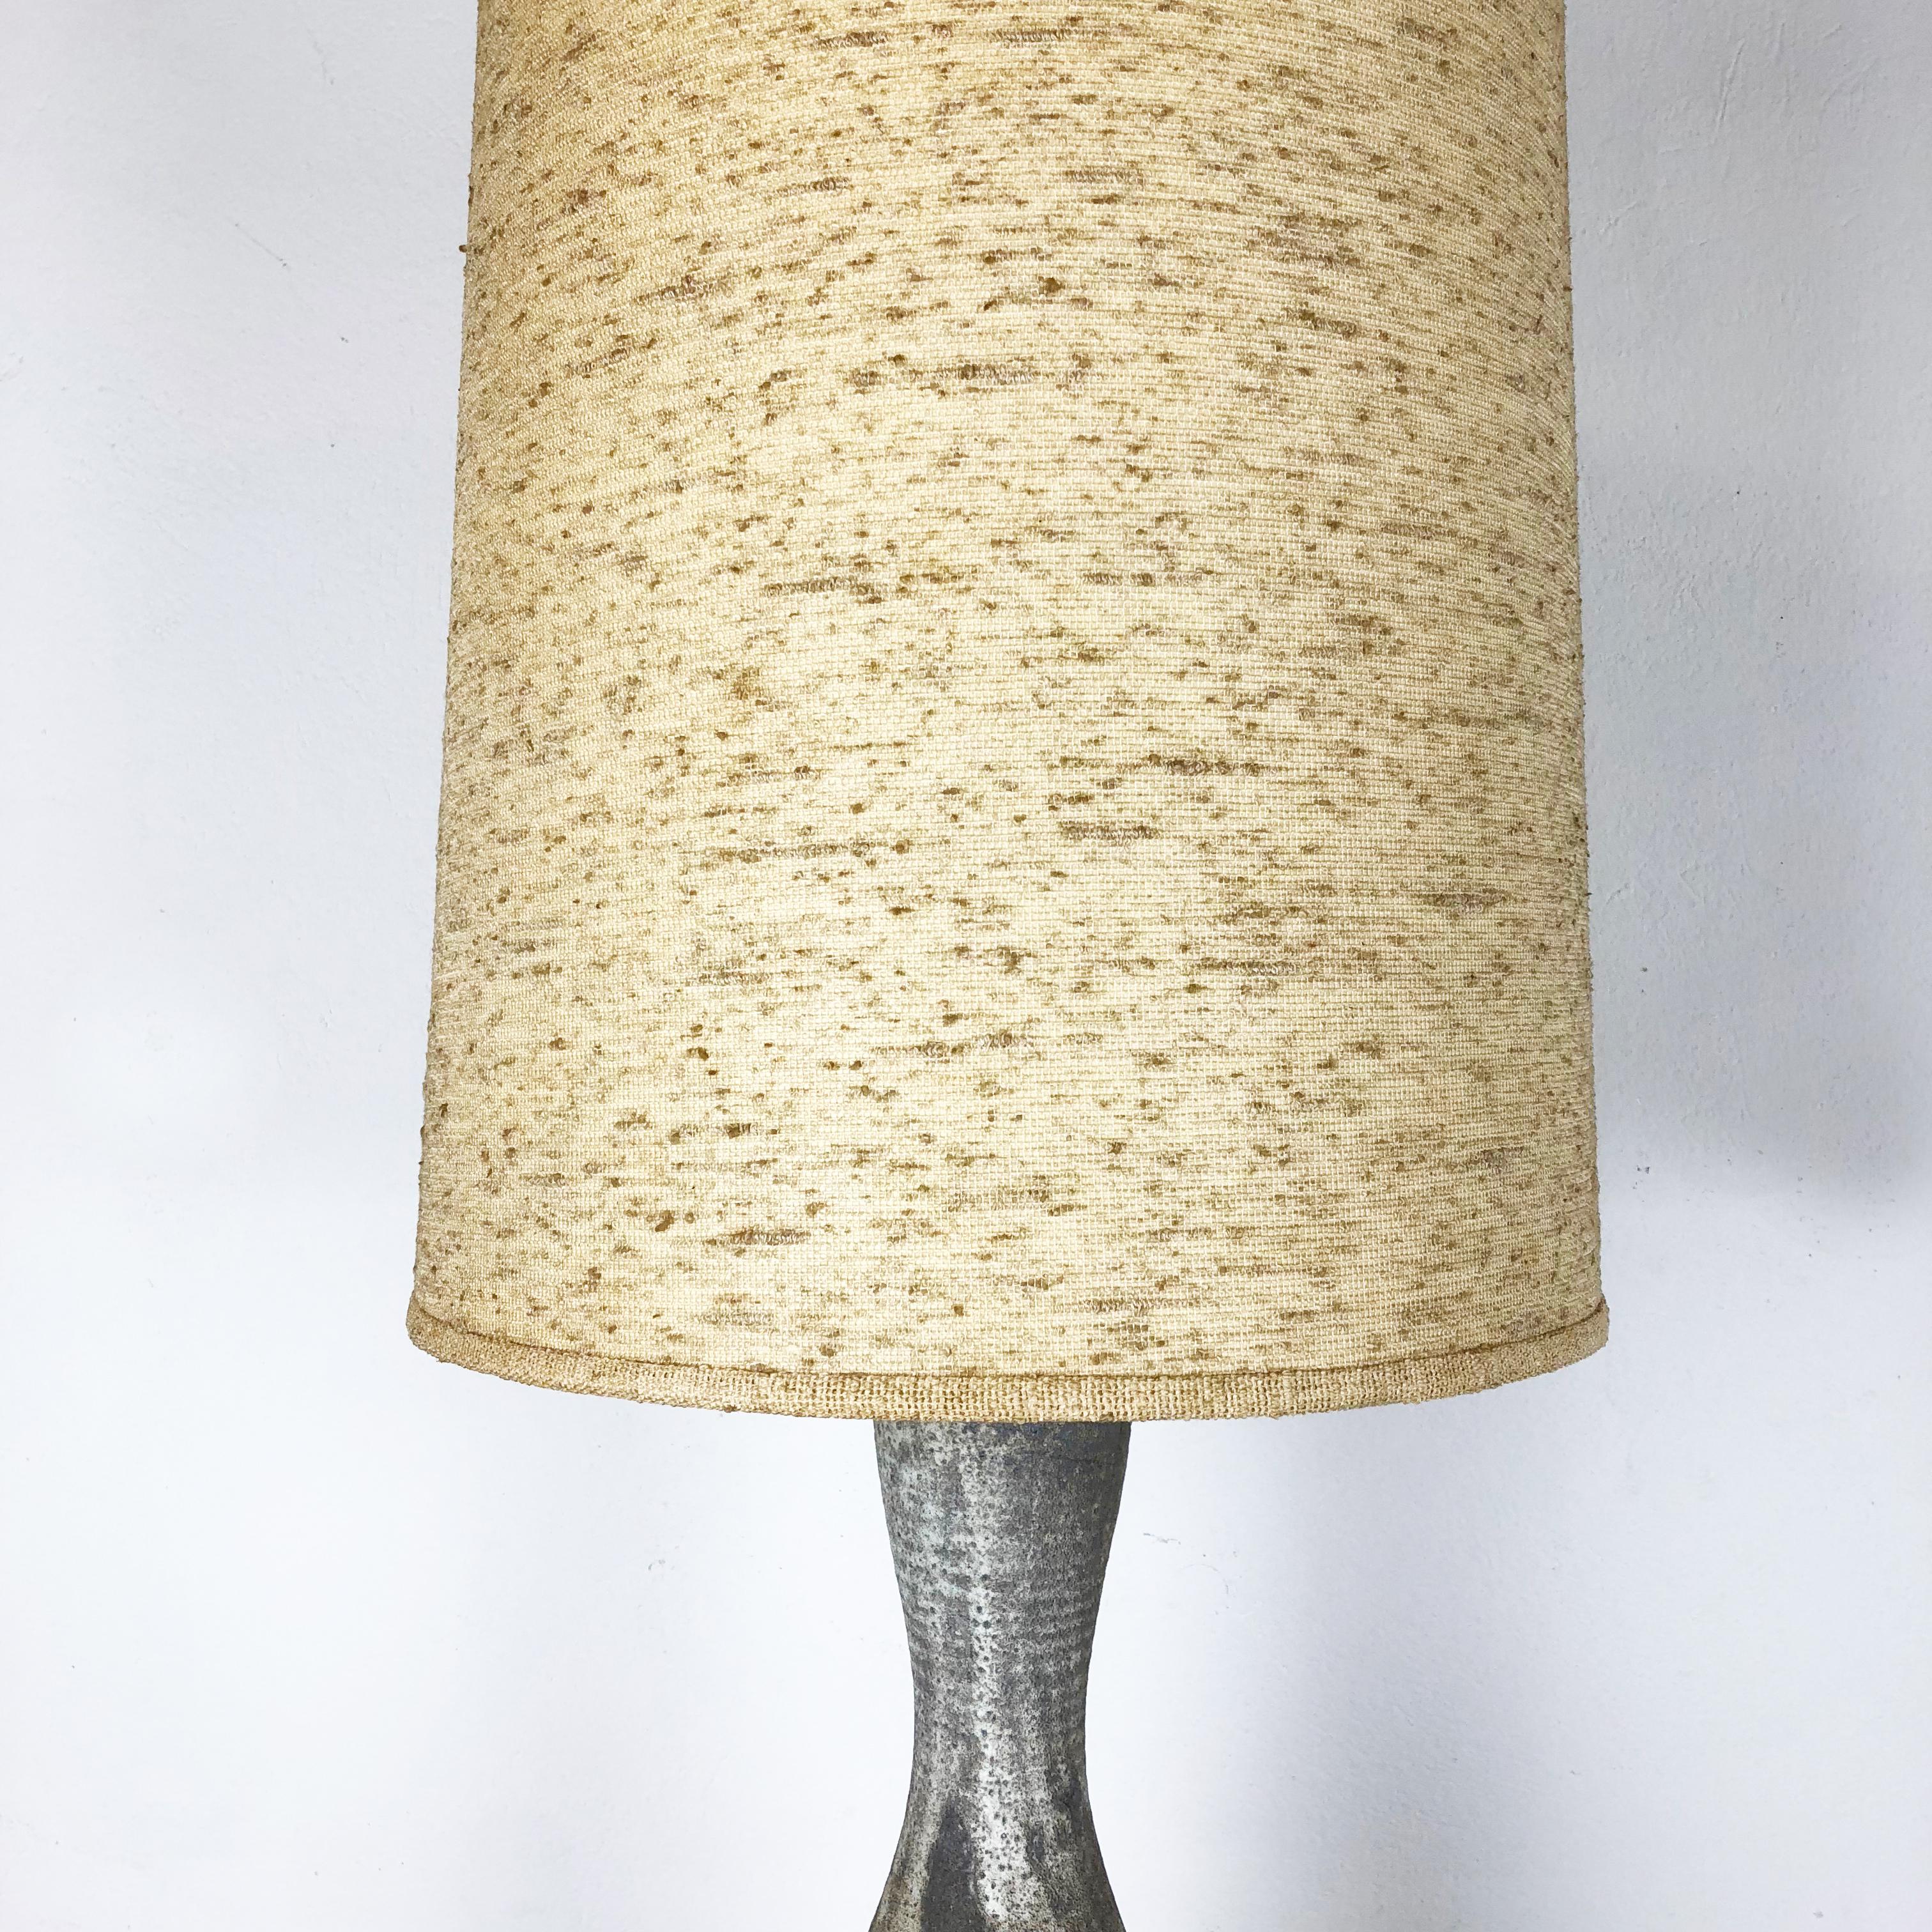 Ceramic Studio Pottery Table Light by Piet Knepper for Mobach, Netherlands 1960s For Sale 10